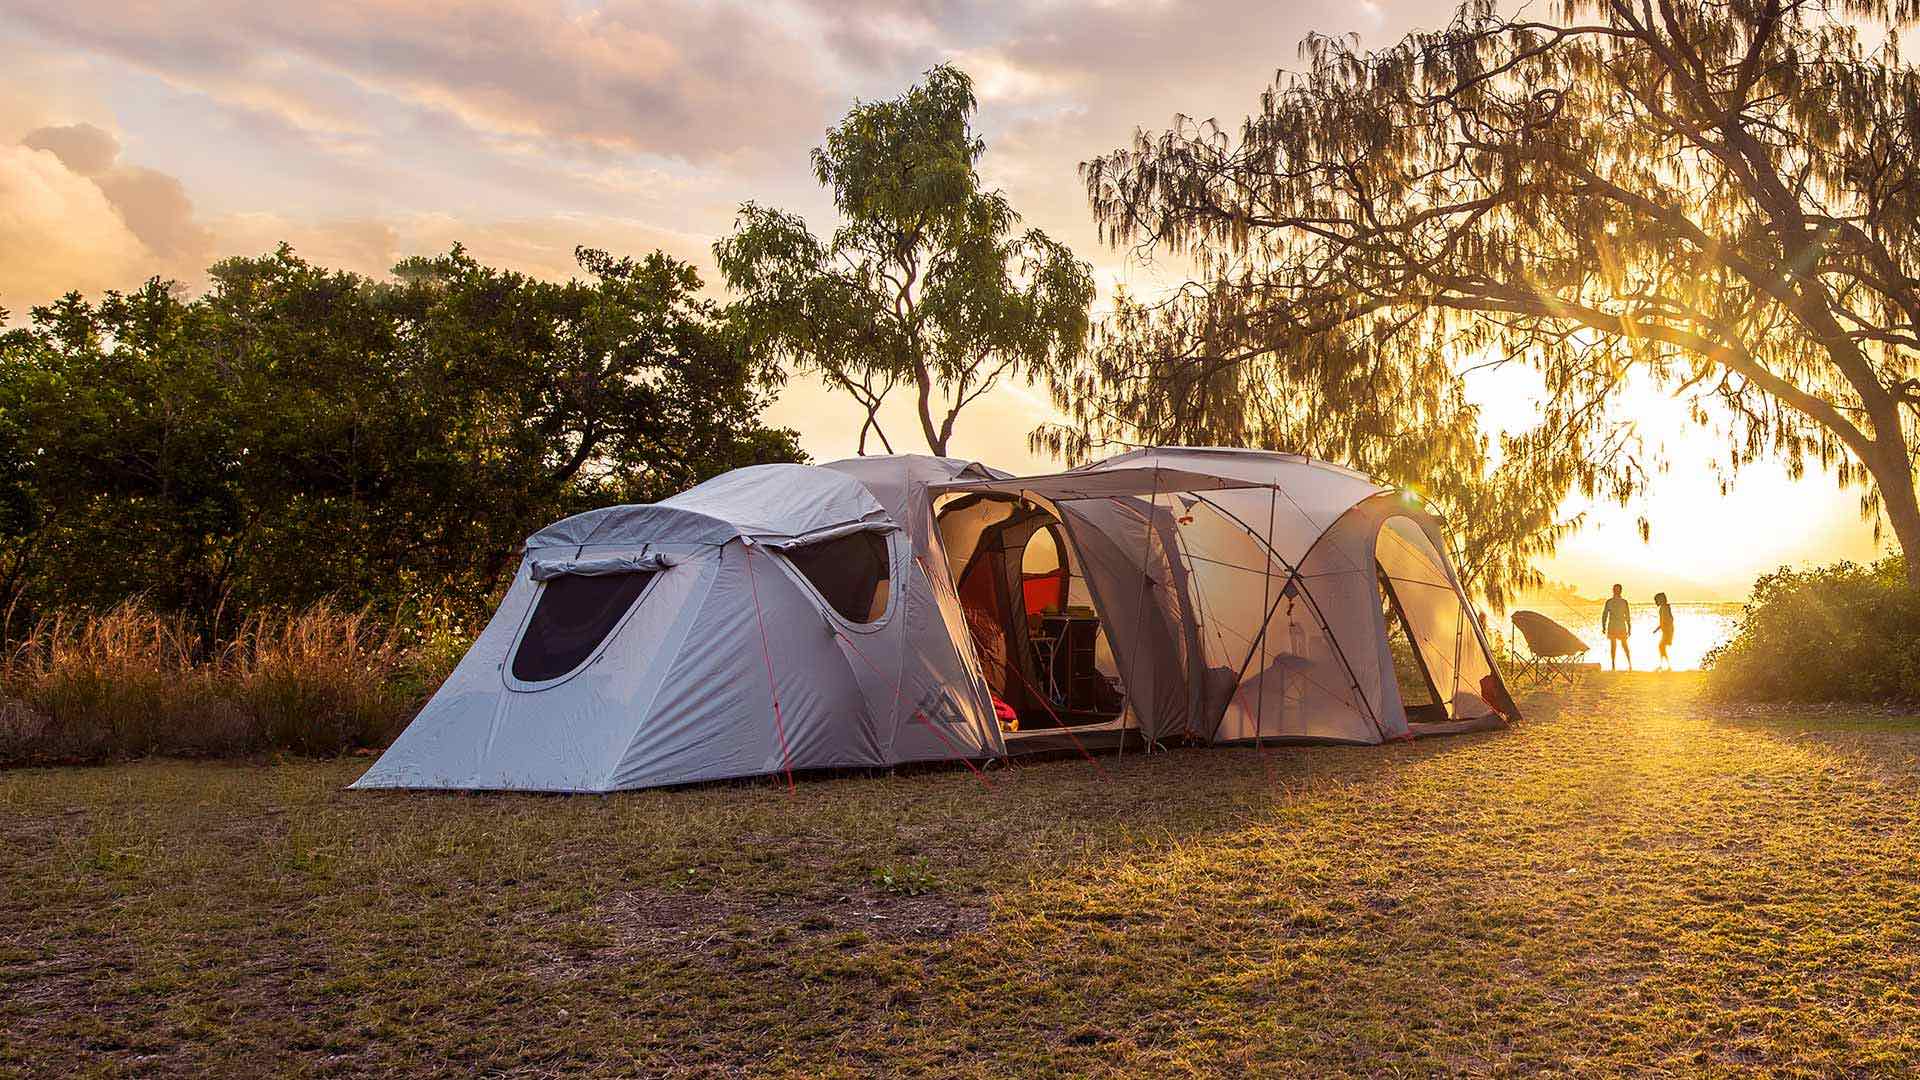 There's a Secret Decked-Out Campsite Hidden Somewhere in Australia